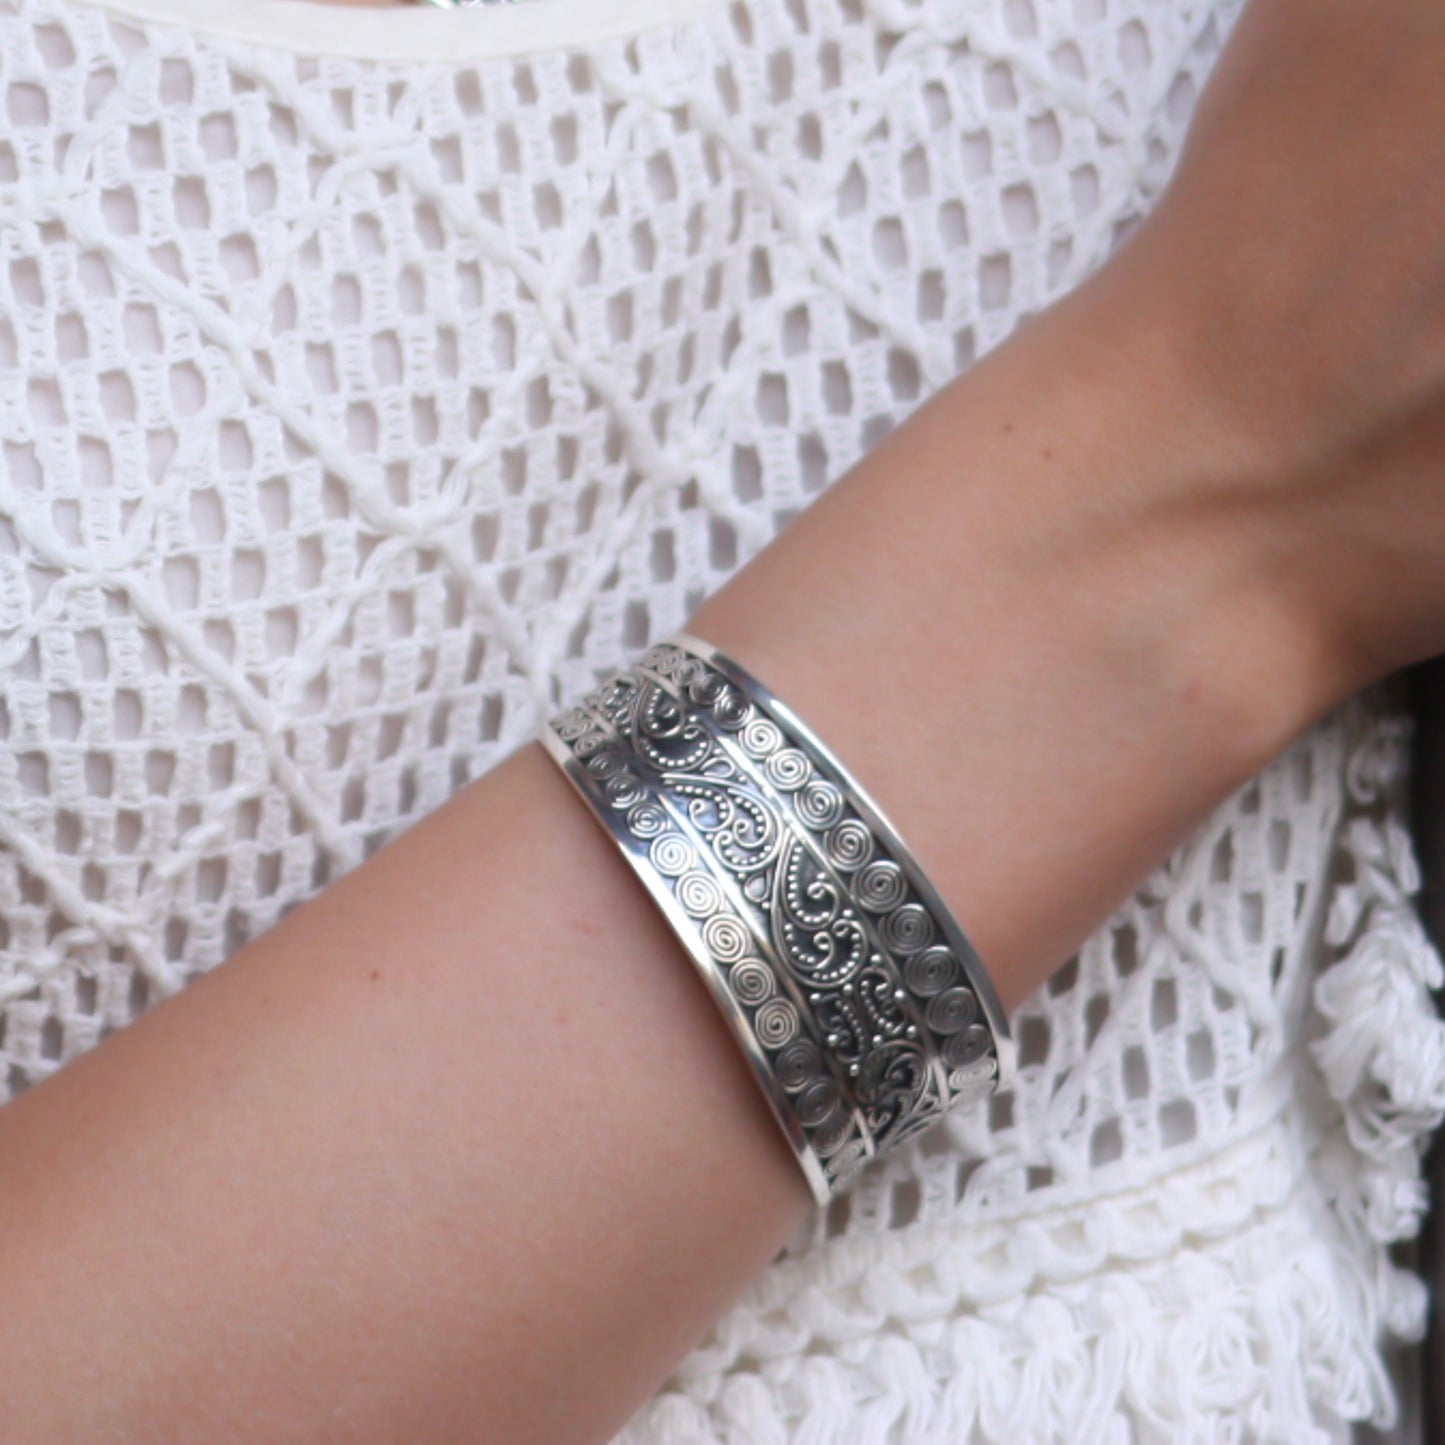 Woman wearing a silver cuff with lots of detailed silverwork.